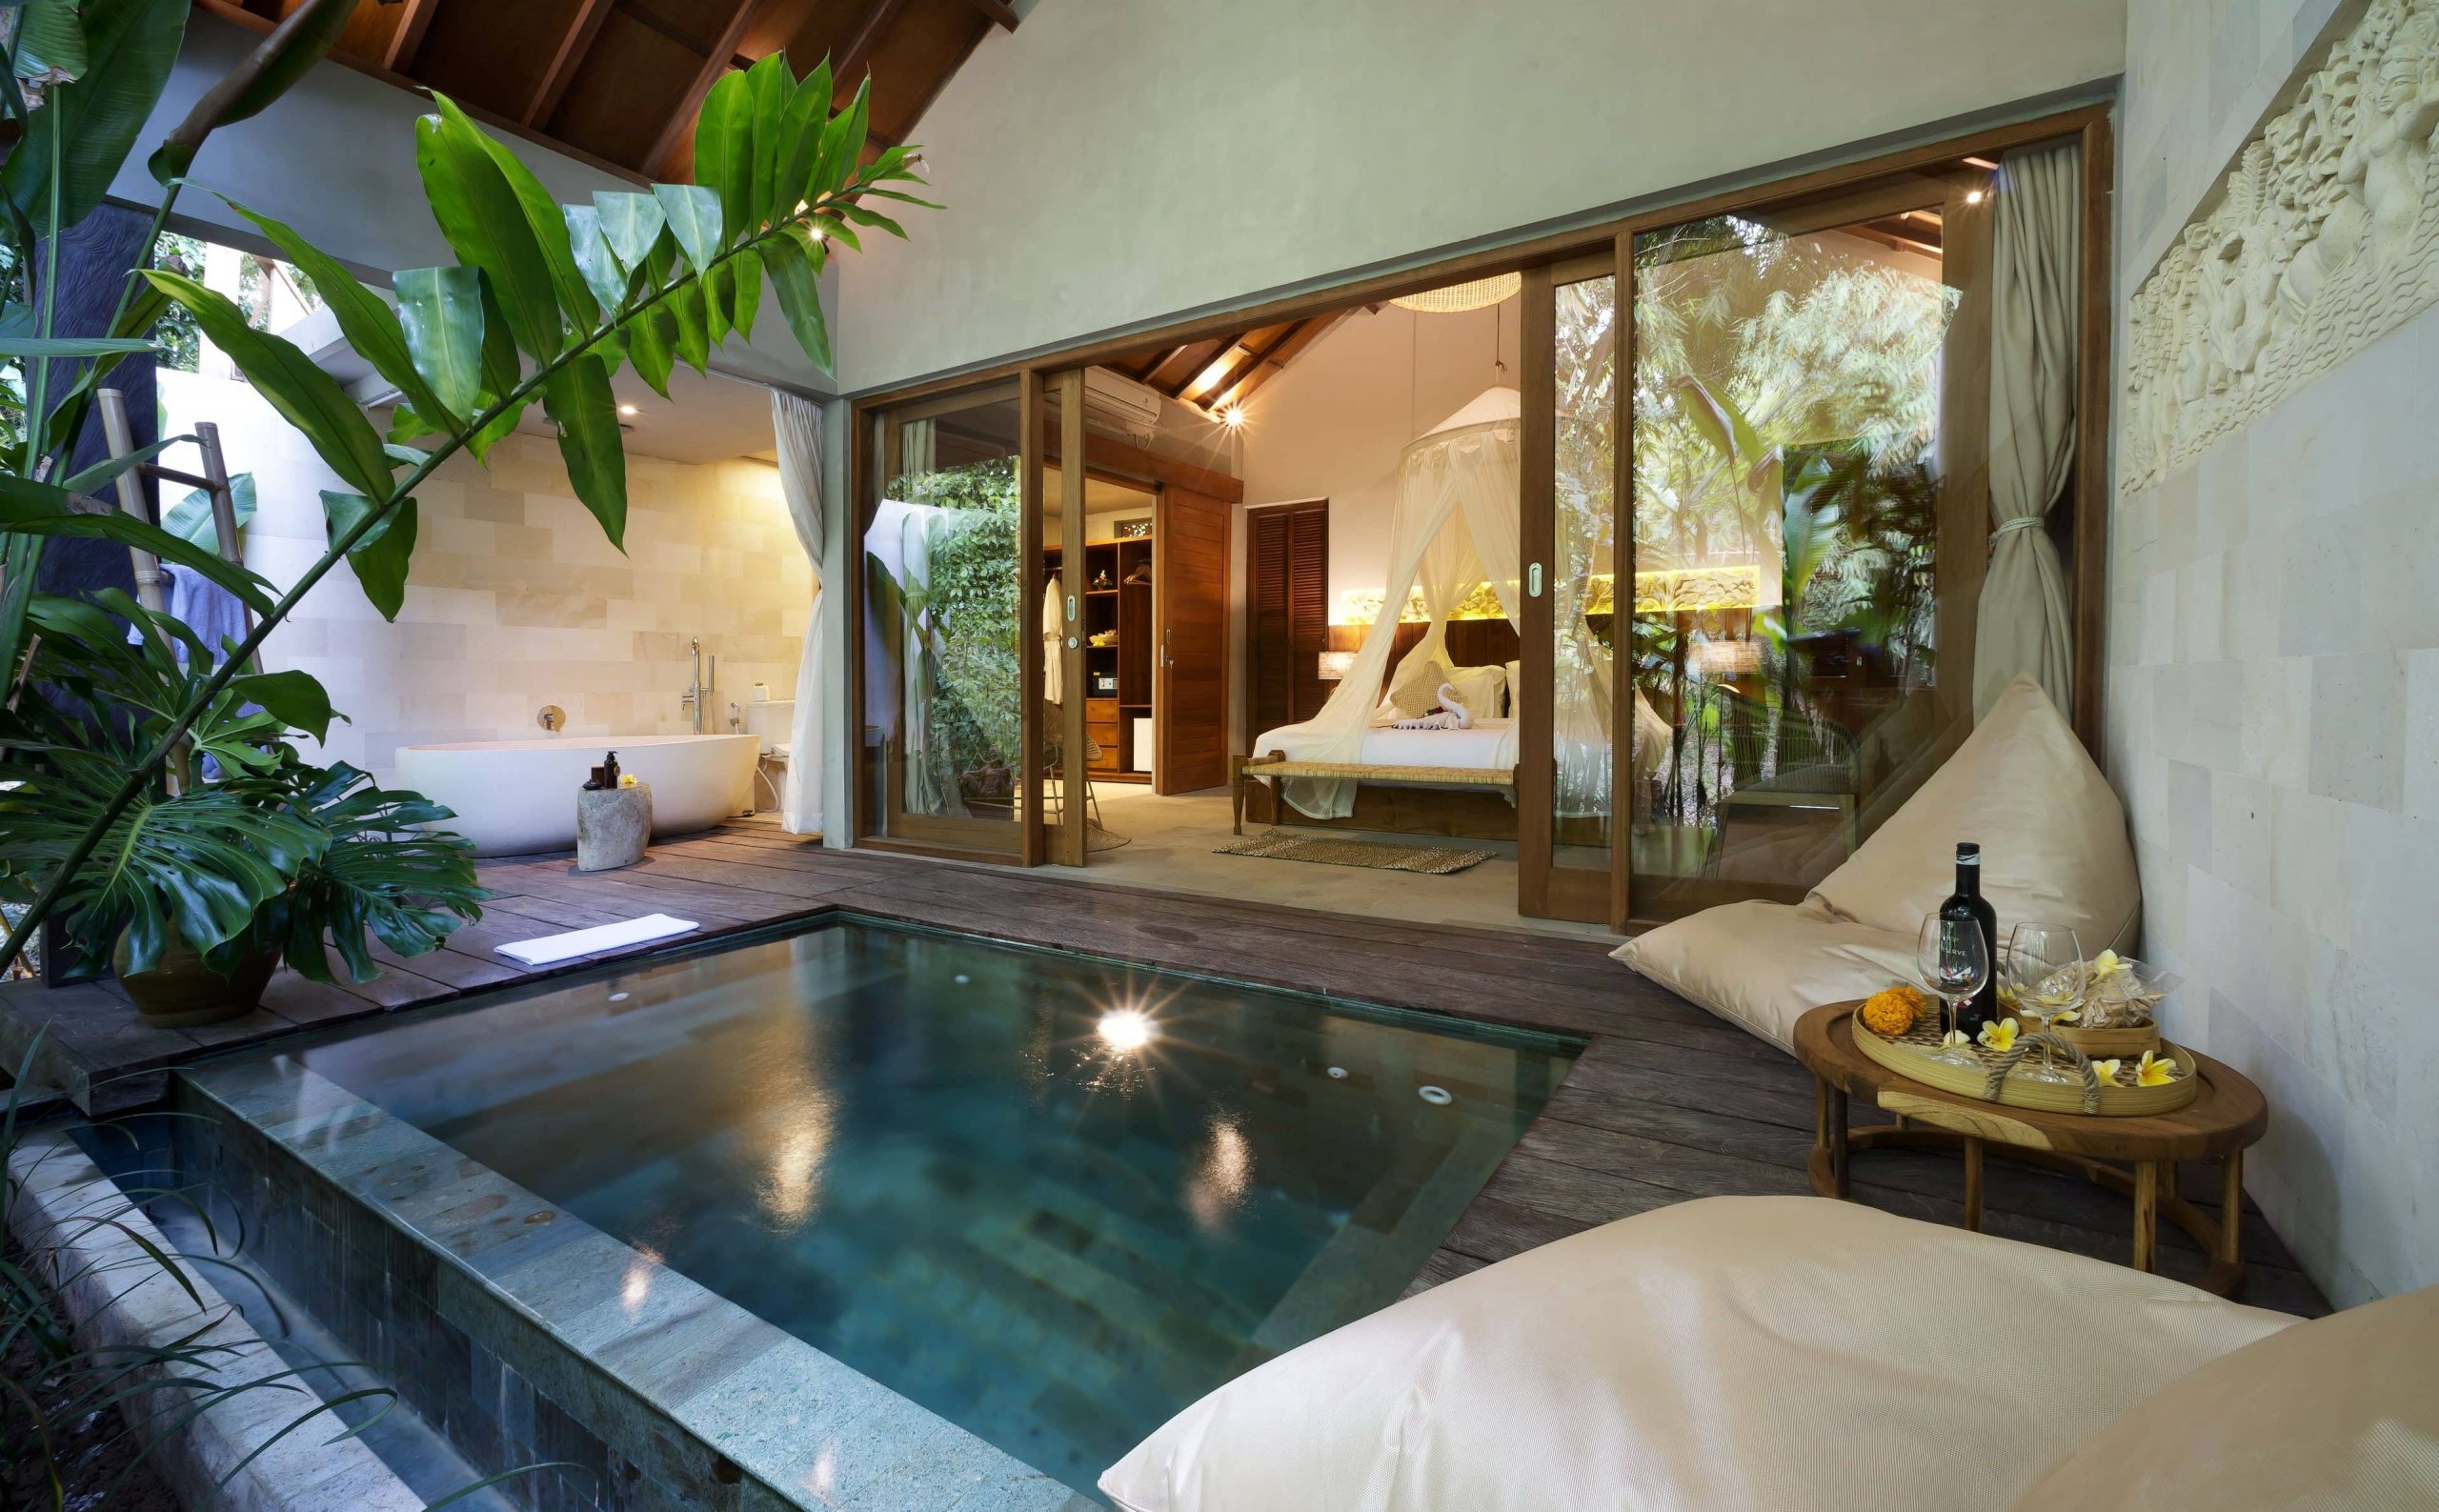 A hot tub pool outside a suite offered to guests at the Kalapa Boutique Resort & Yoga Retreat in Bali.